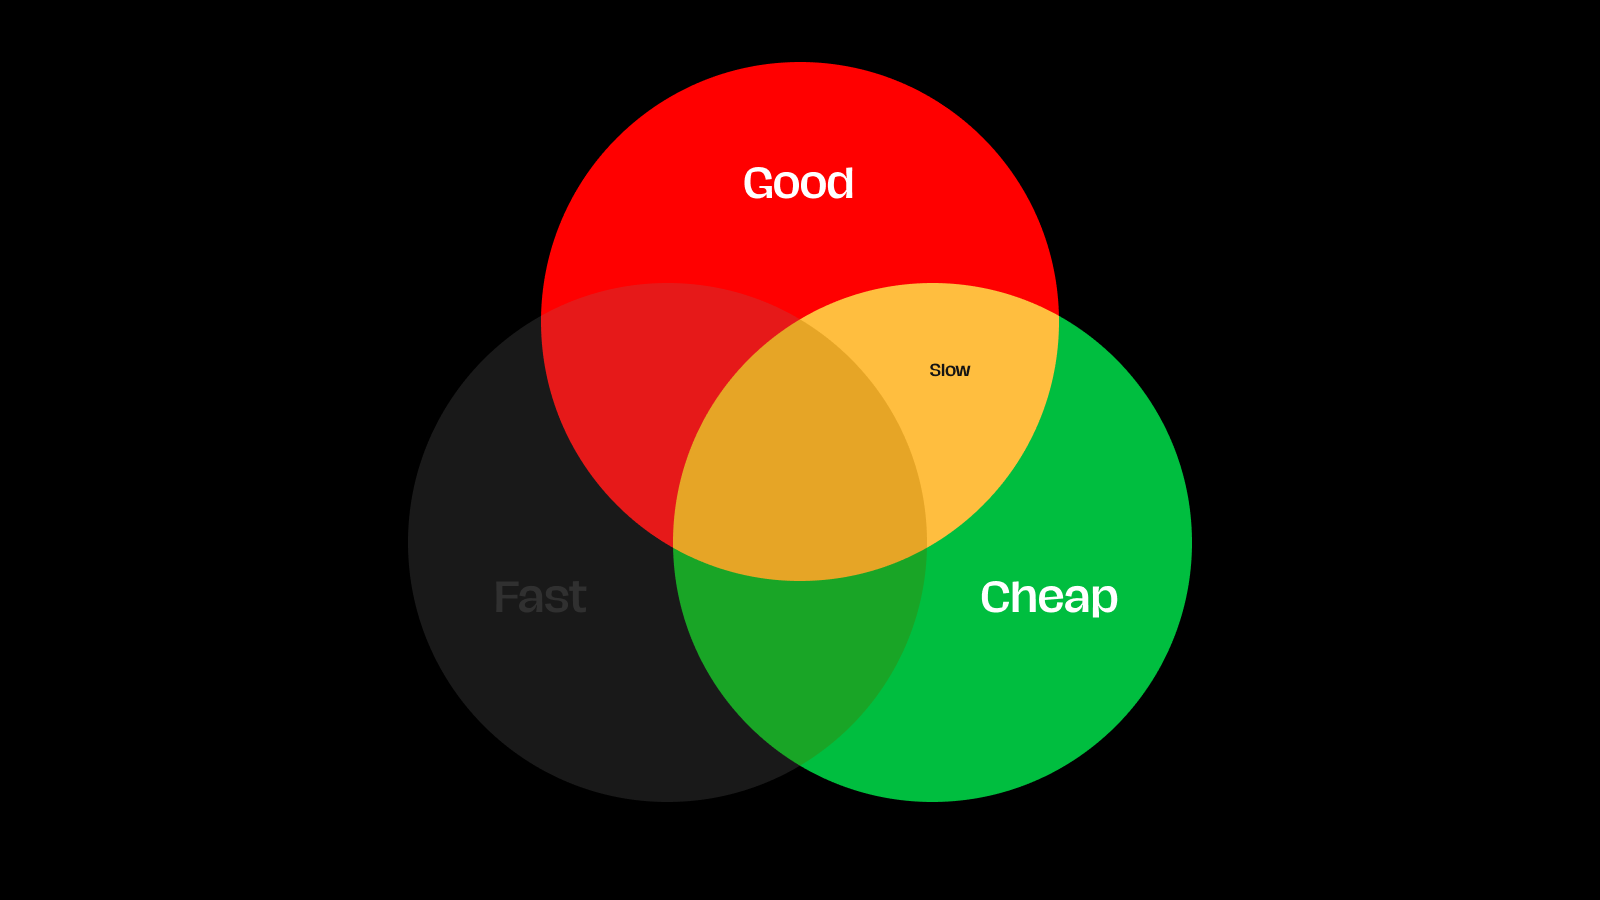 A Venn diagram of two circles: Good and Cheap. The combination is Slow.